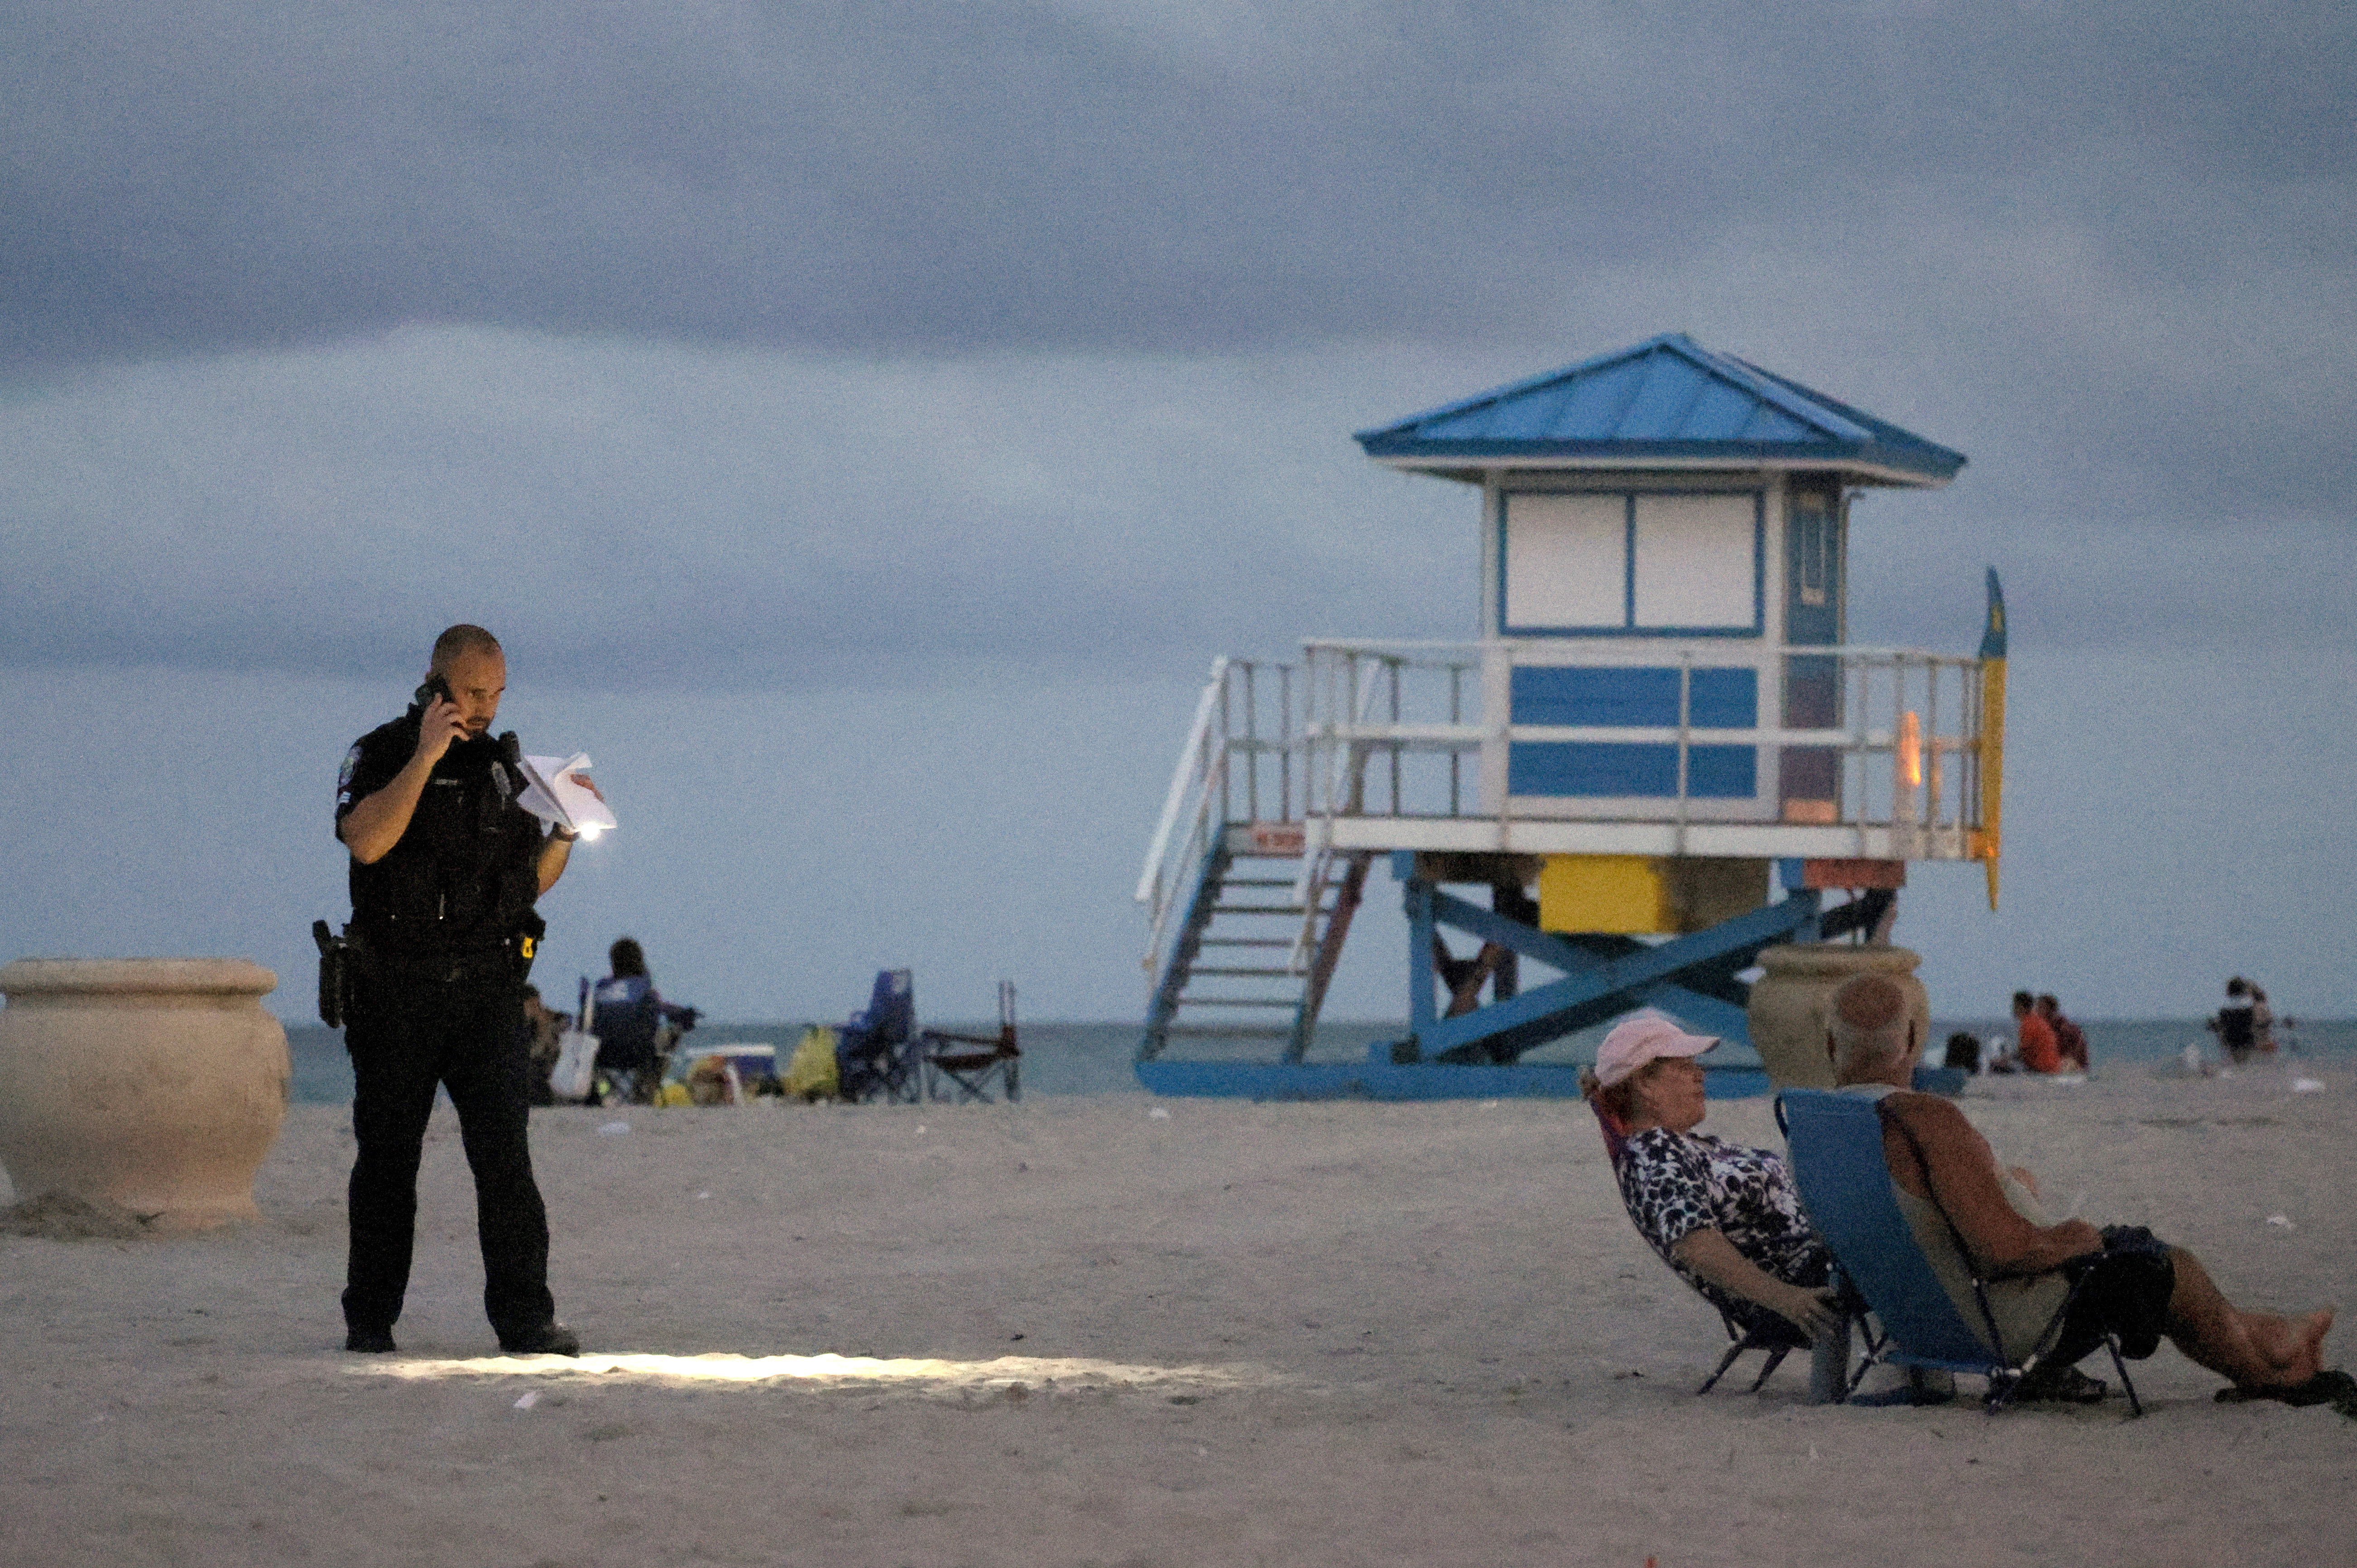 Florida Police Search For 3 Gunmen Who Wounded 9 At Crowded Beach On Memorial Day